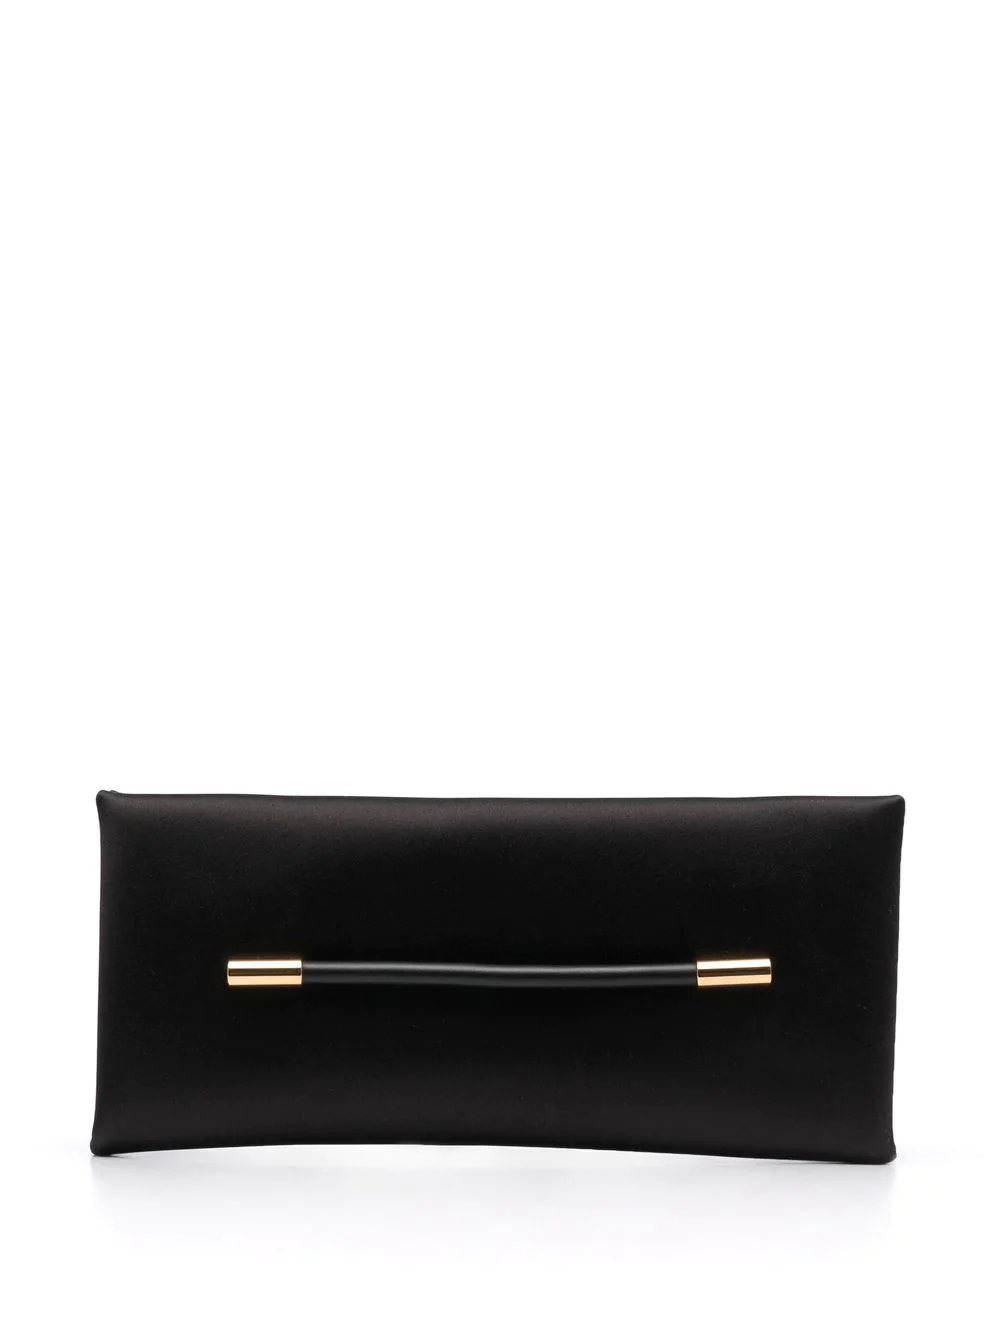 TOM FORD CLUTCH WITH STRAP